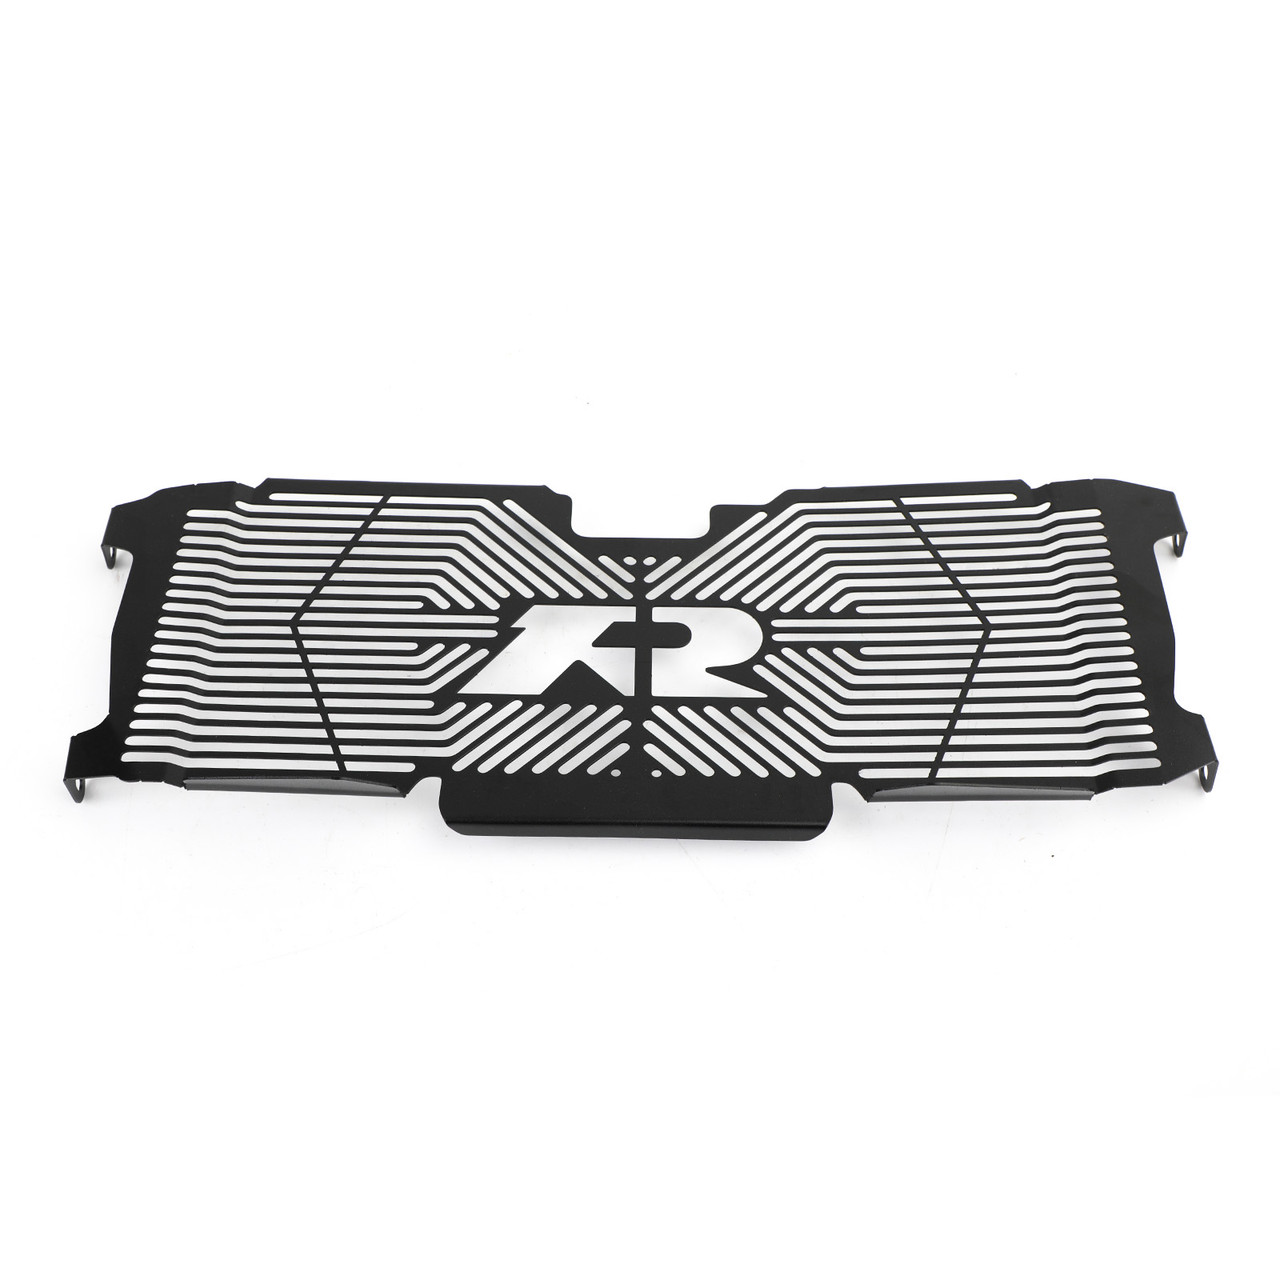 Black Radiator Guard Cover Fits For BMW R1200RS R1250RS R1200R 15-20 Black